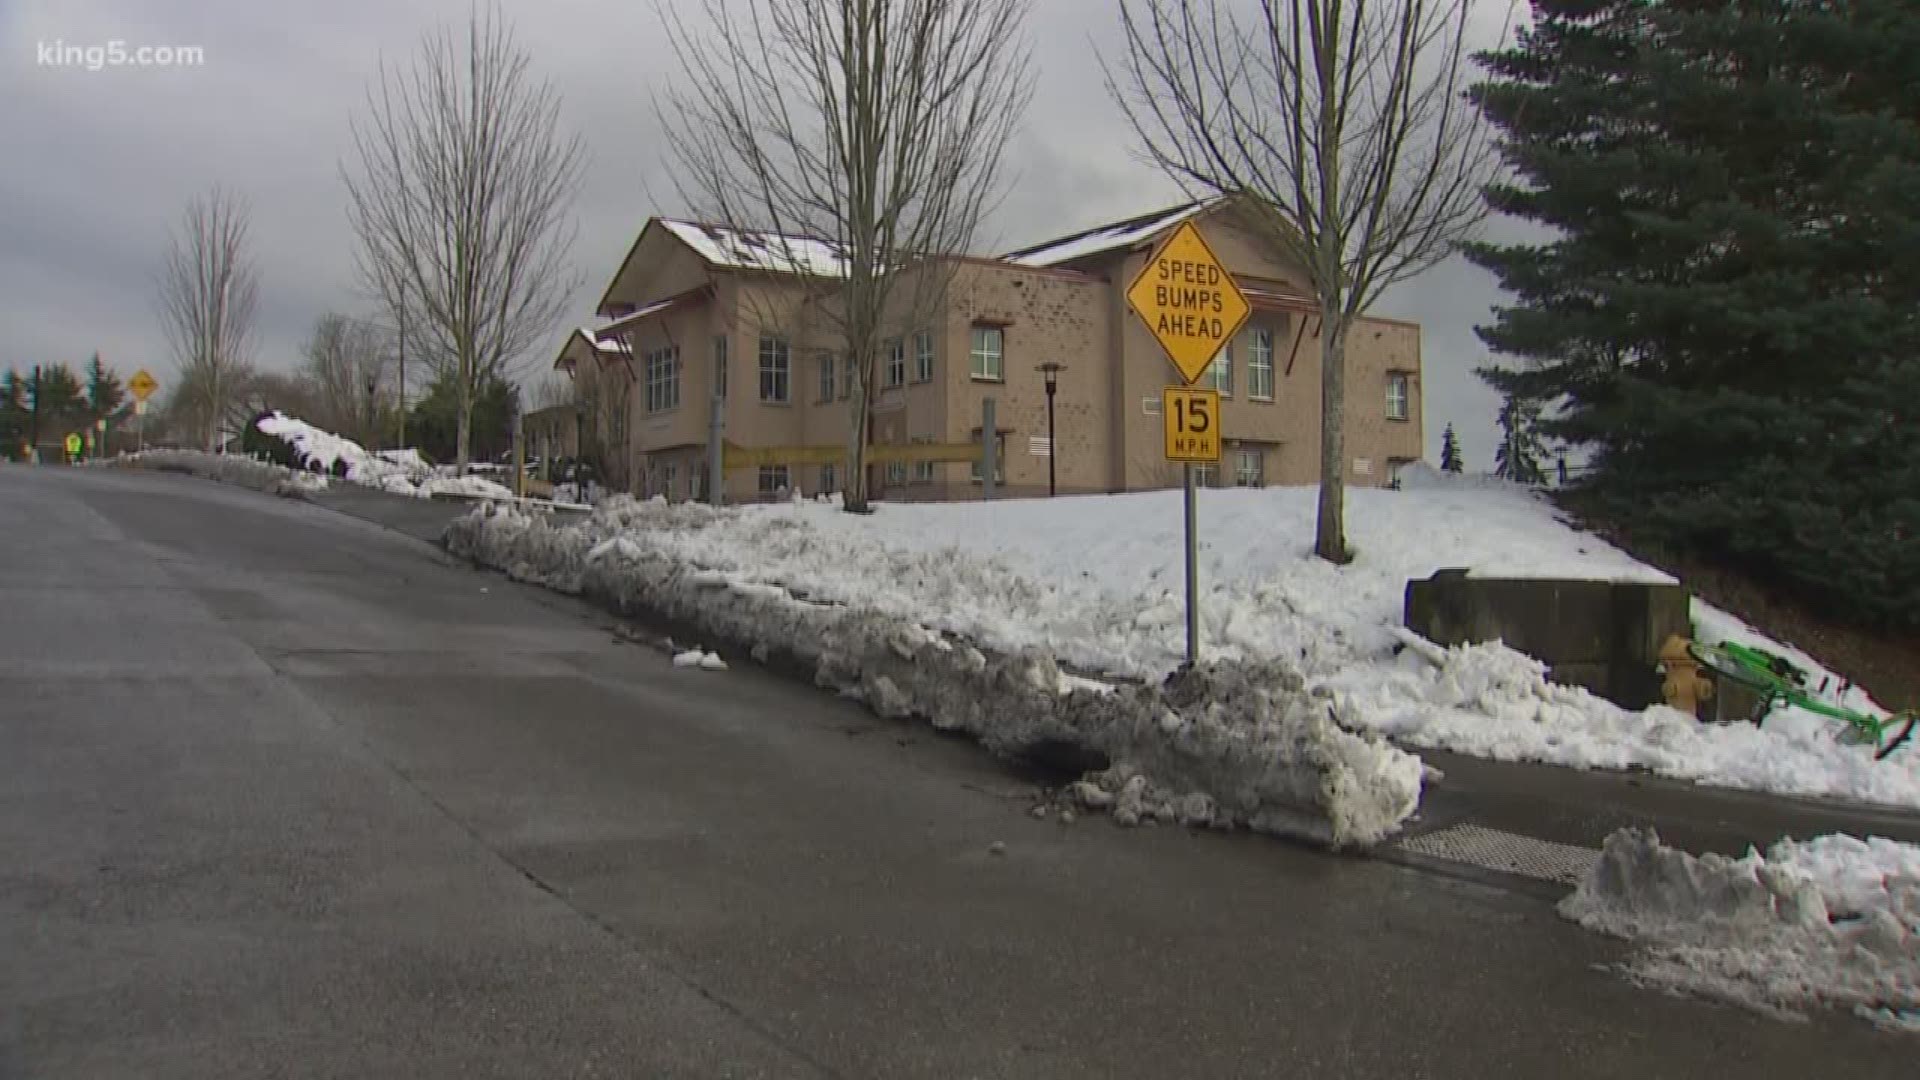 KING 5's Chris Daniels asked why the state's biggest district made the call to cancel school and what they are saying about Thursday.